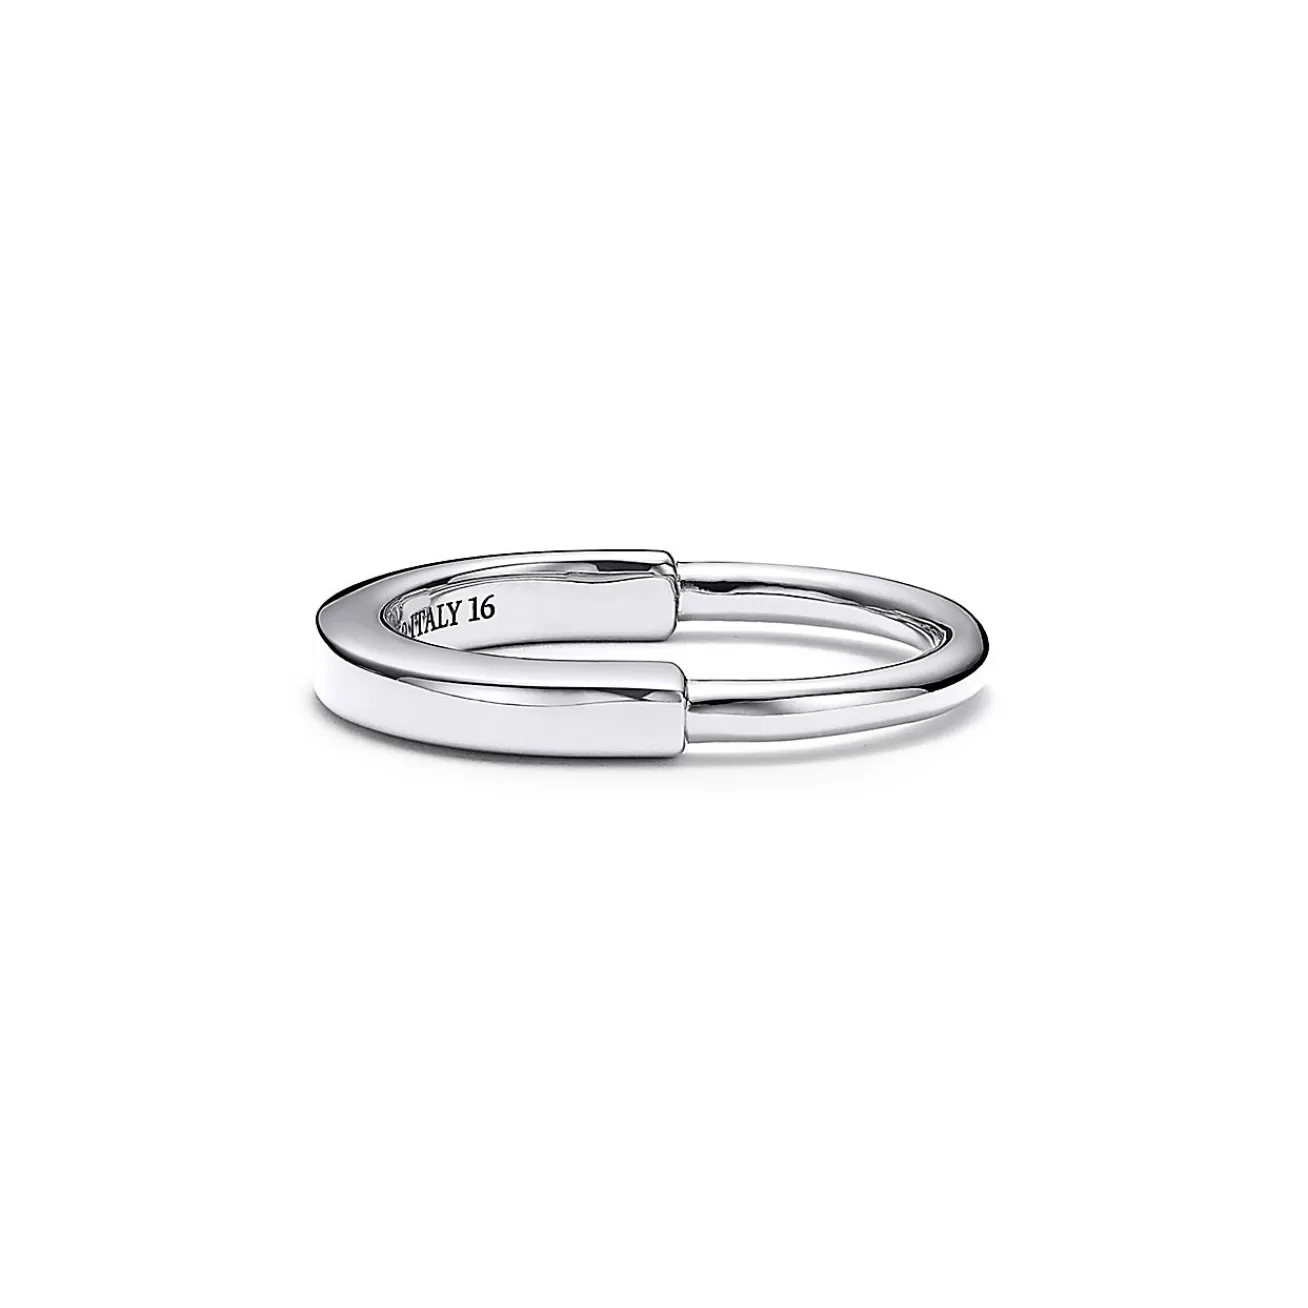 Tiffany & Co. Tiffany Lock Ring in White Gold | ^ Rings | Stacking Rings